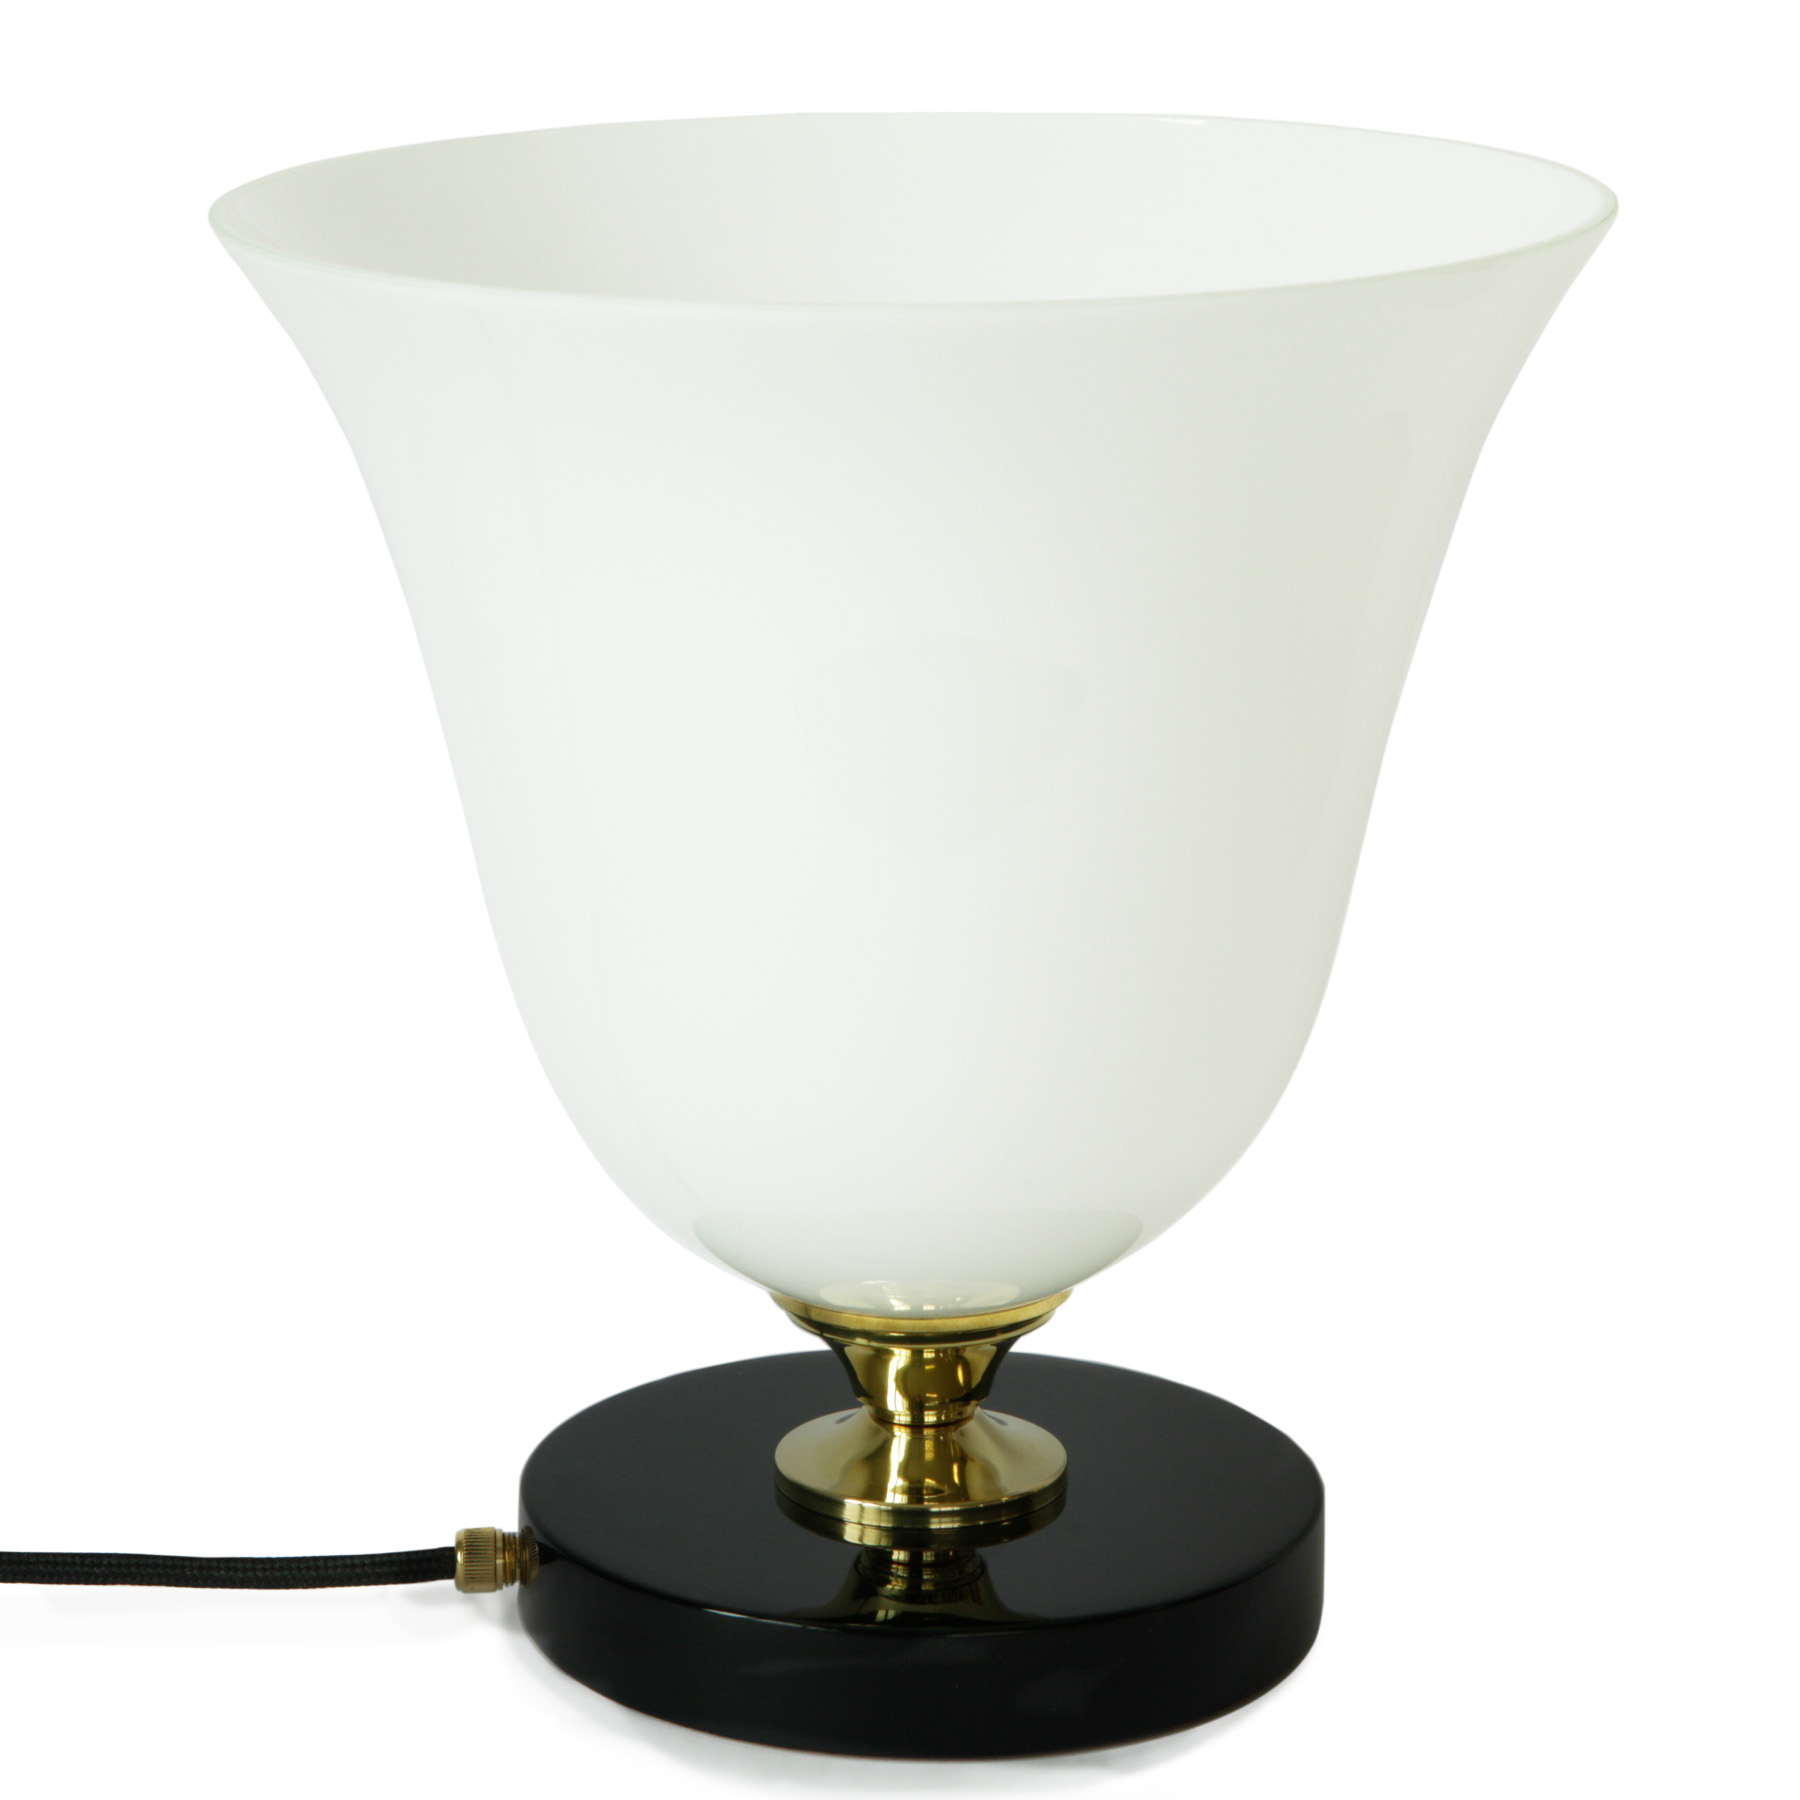 Classy table lamp in Art Deco style